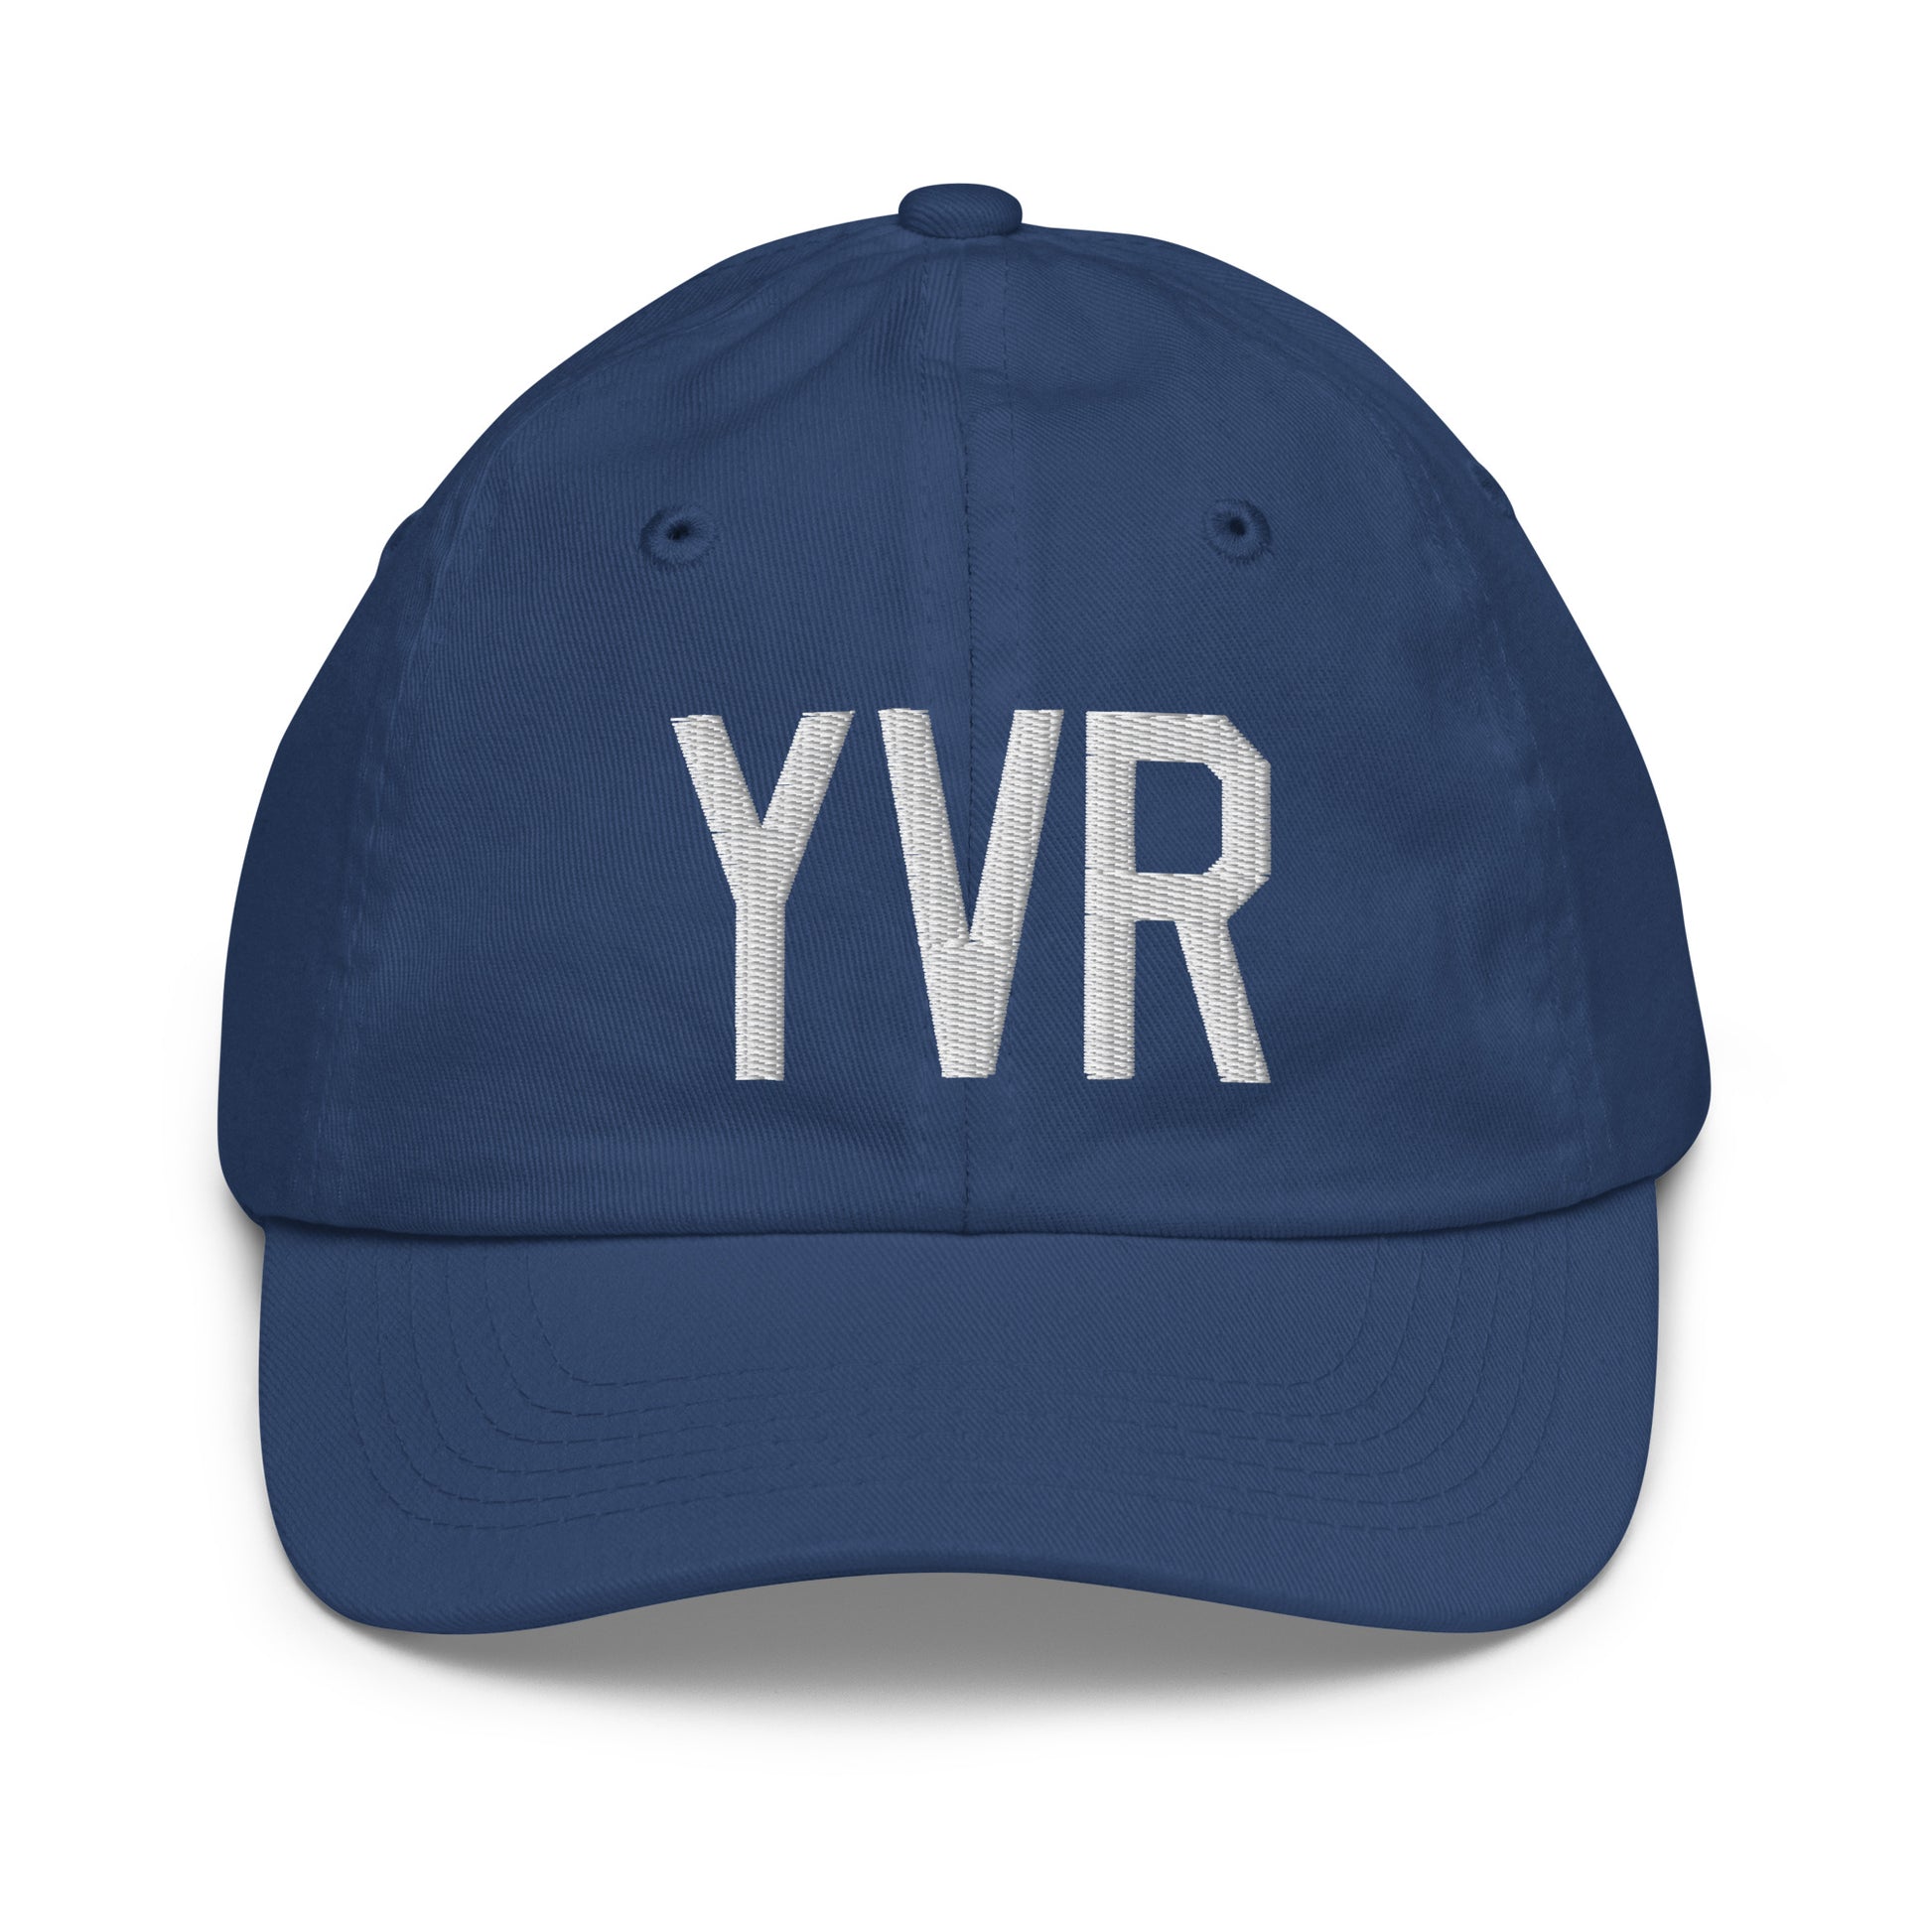 Airport Code Kid's Baseball Cap - White • YVR Vancouver • YHM Designs - Image 20